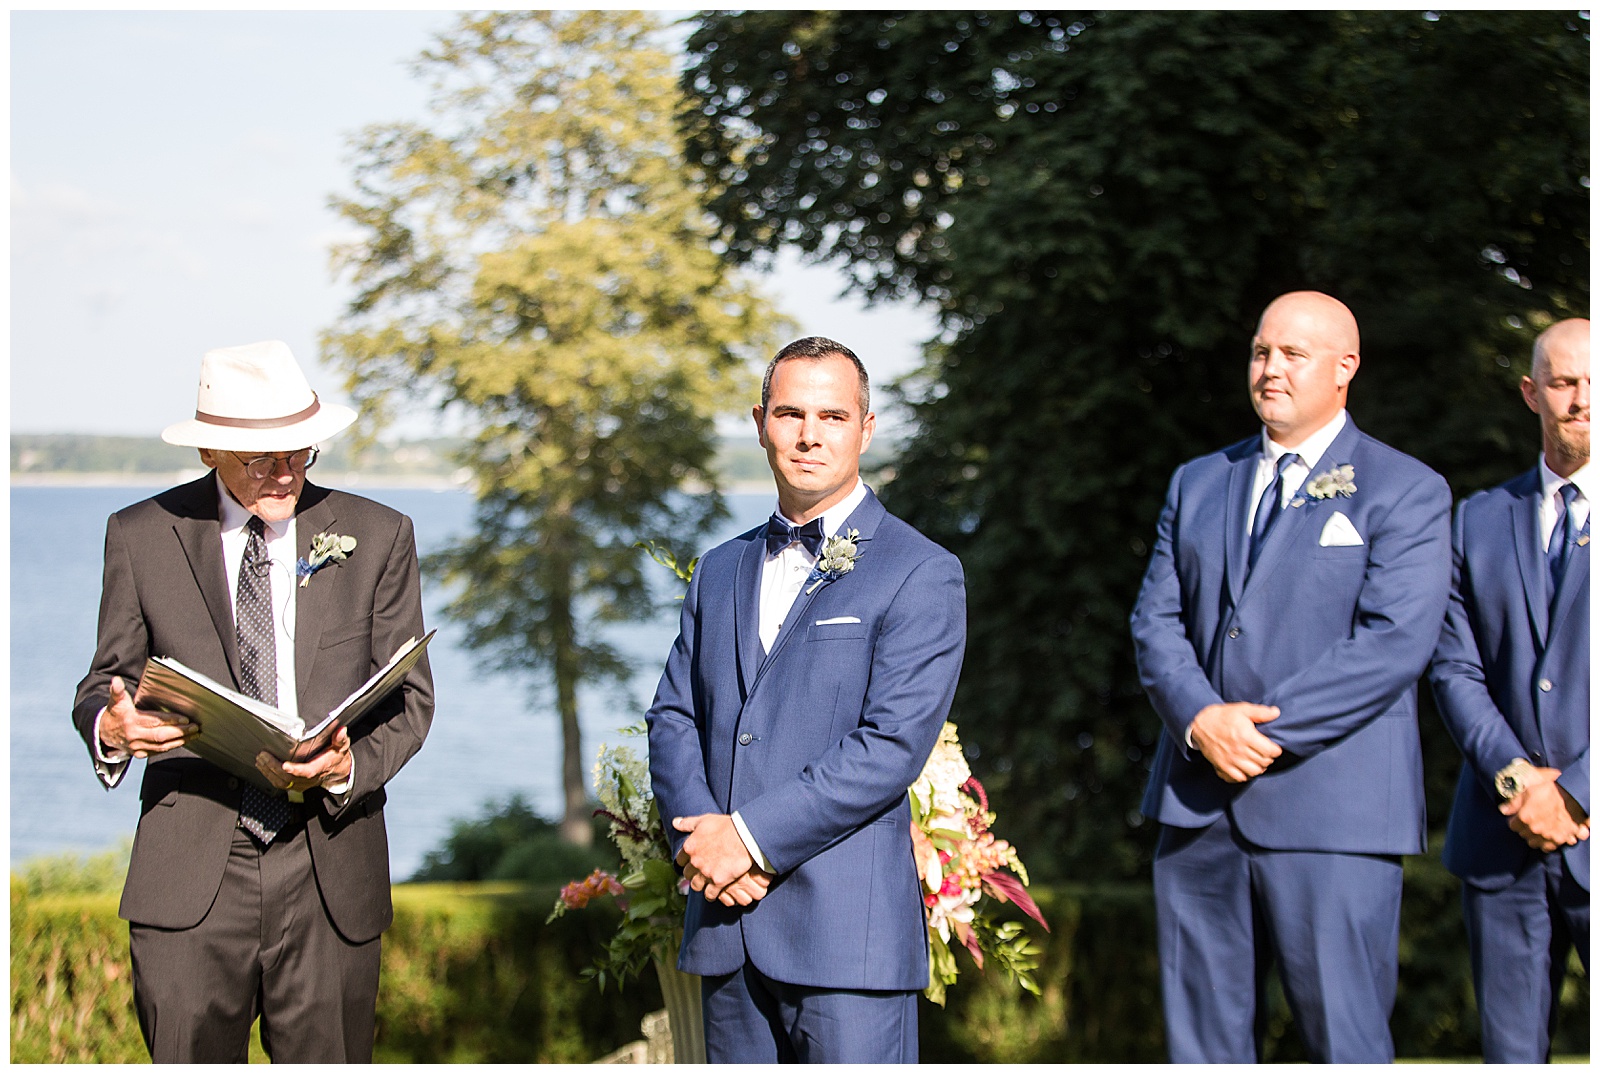 Groom watches as the bride makes her way down the aisle at Glen Manor